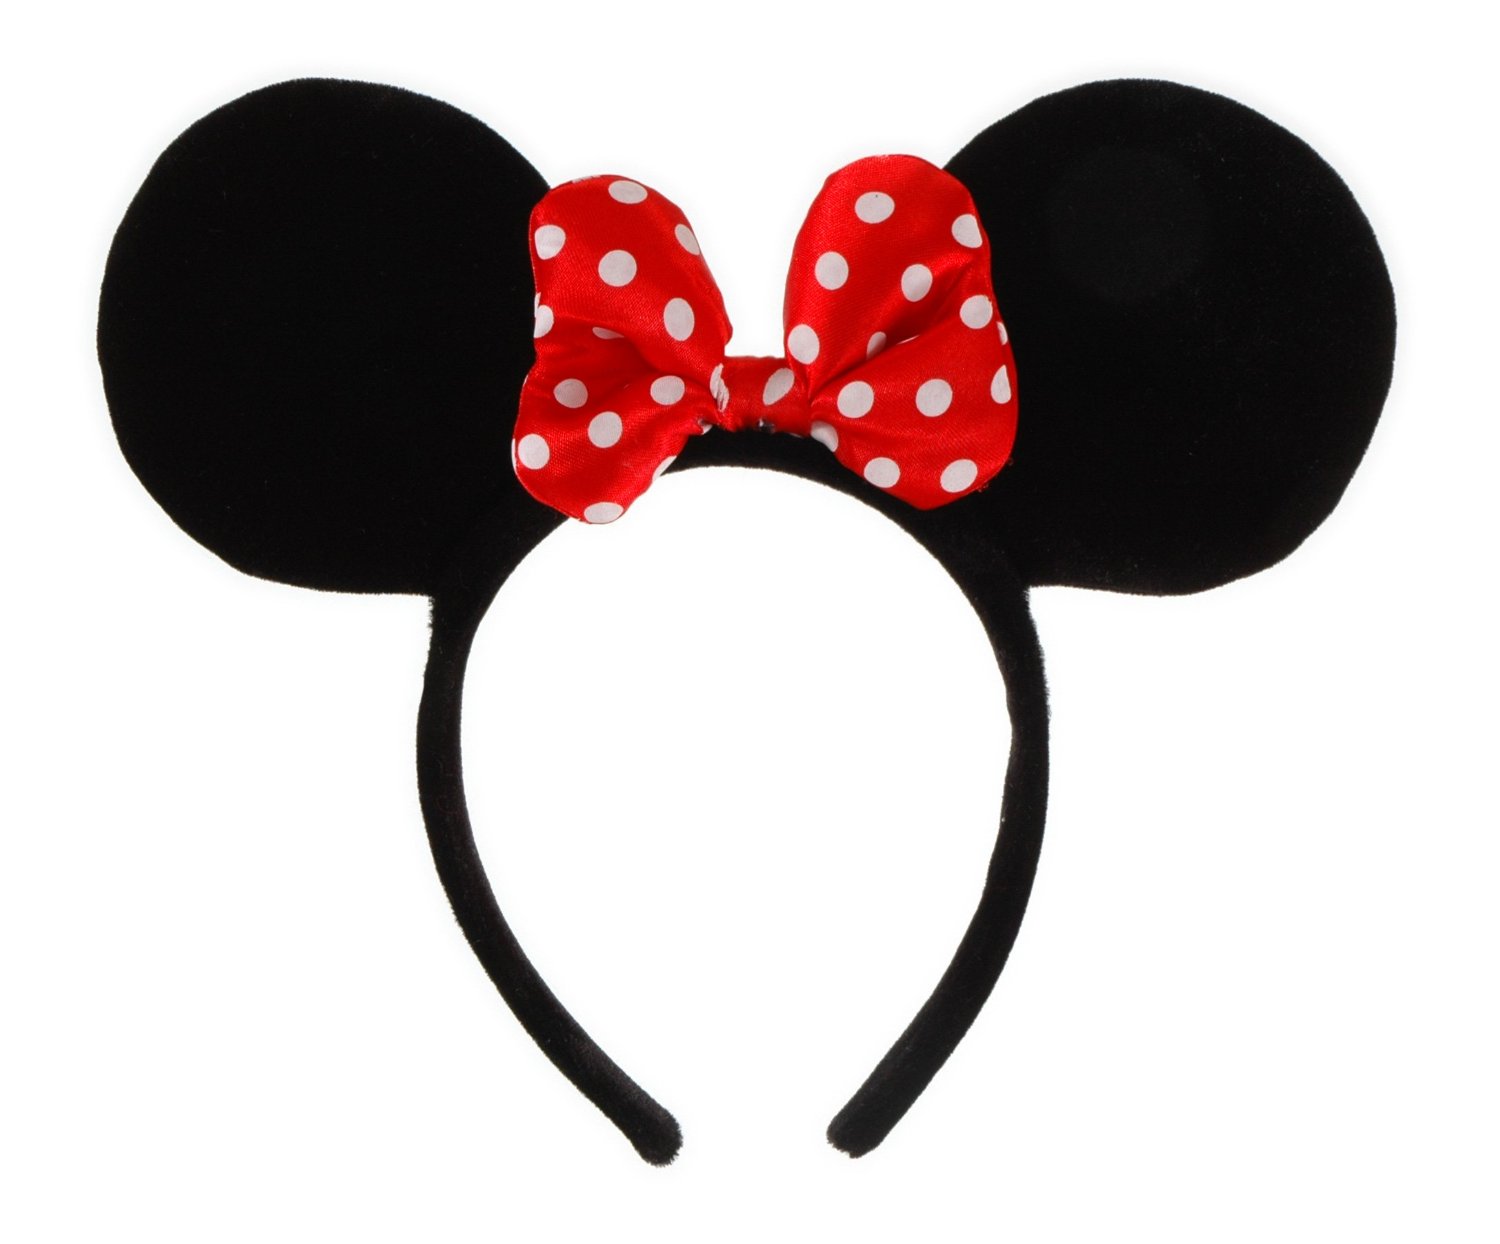 These Minnie Ears Headband Are A Must Have Accessory For A Minnie